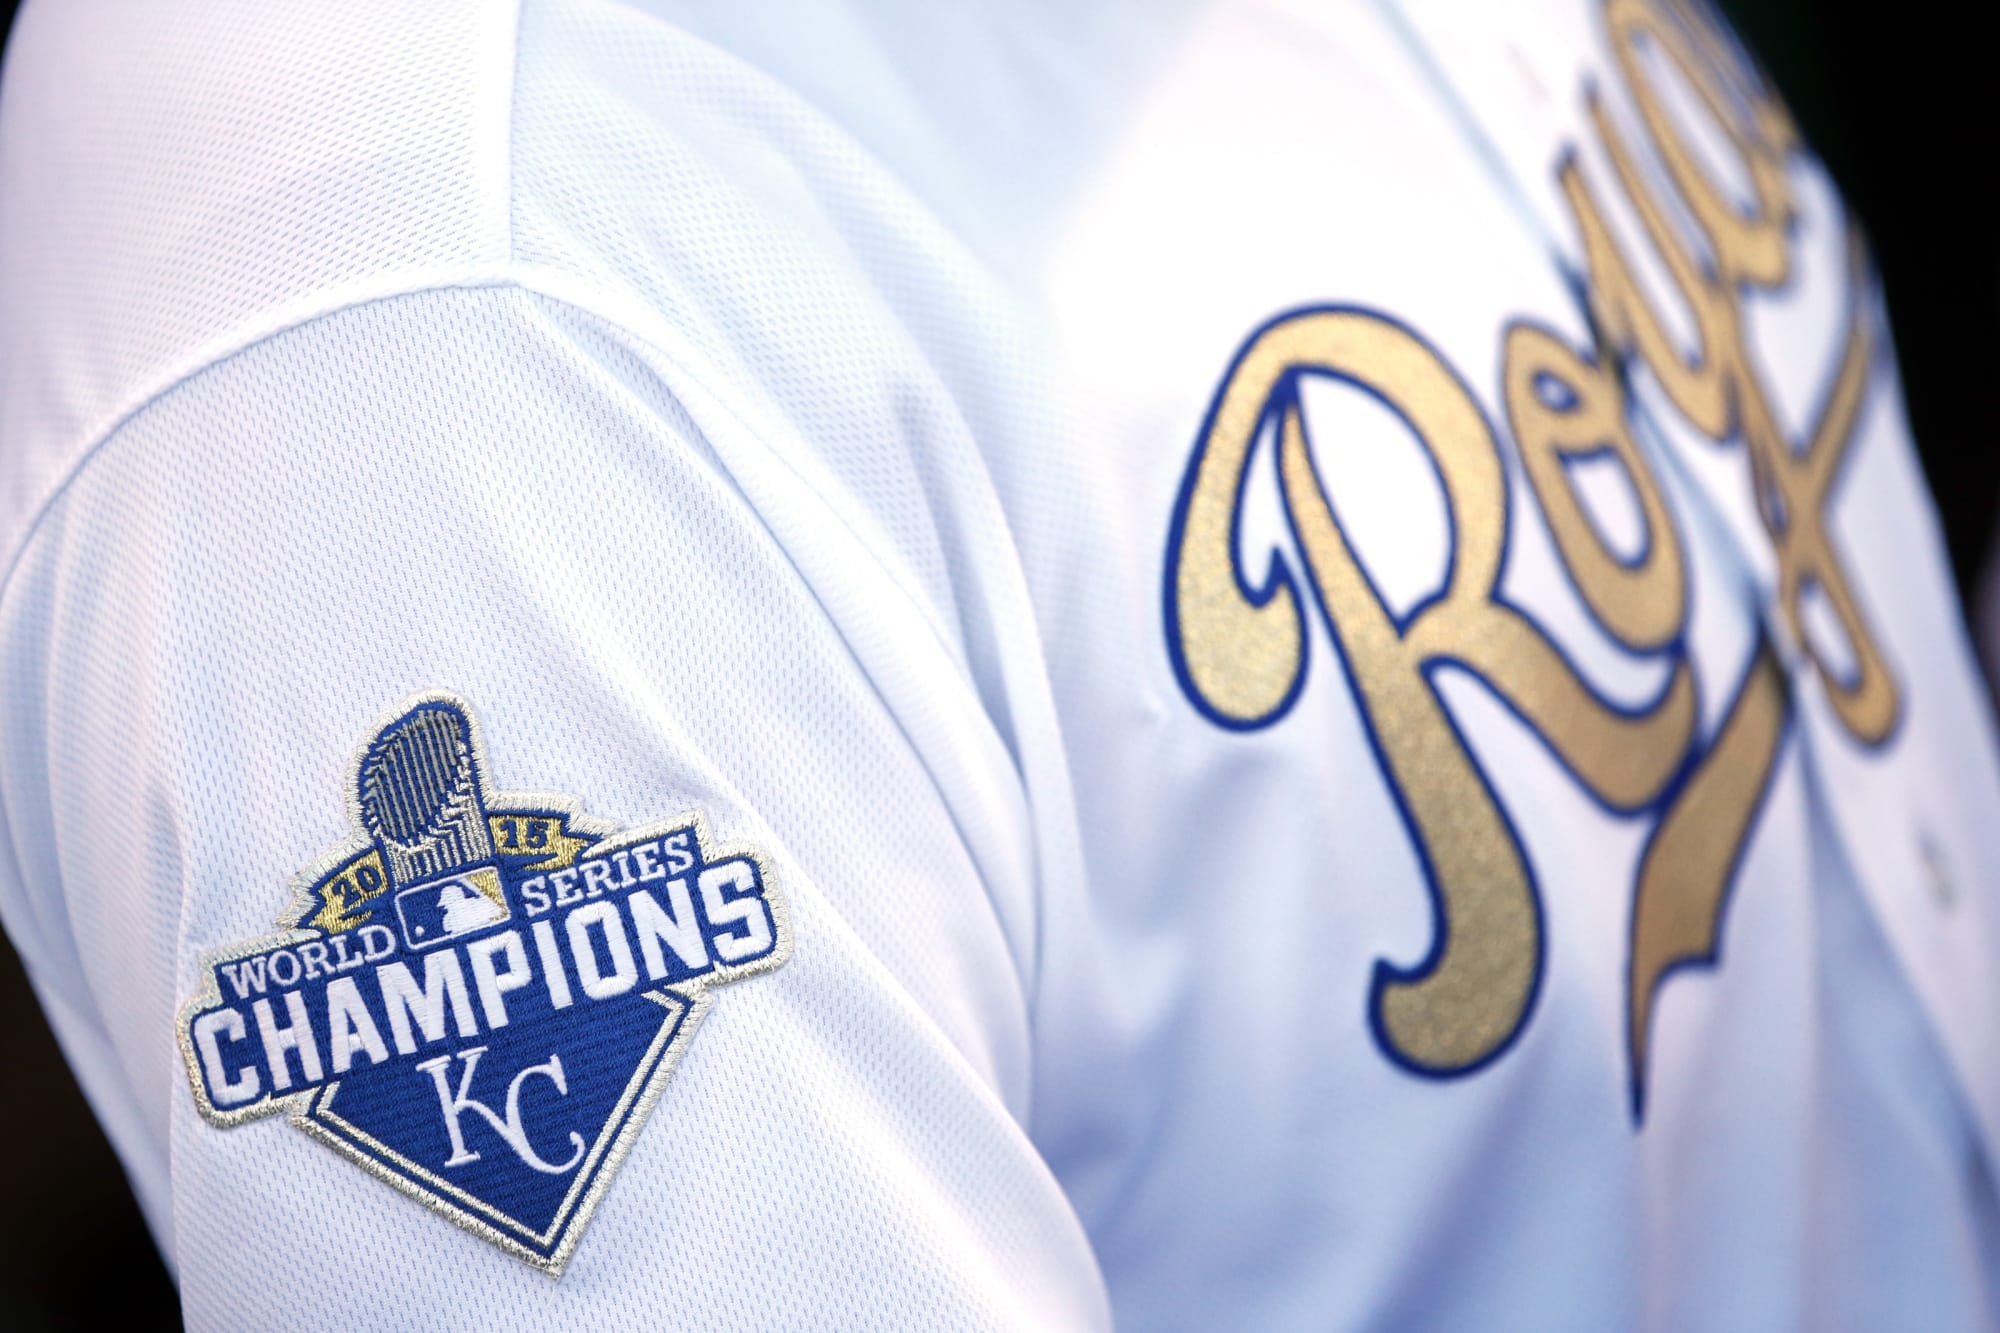 royals white and gold jersey